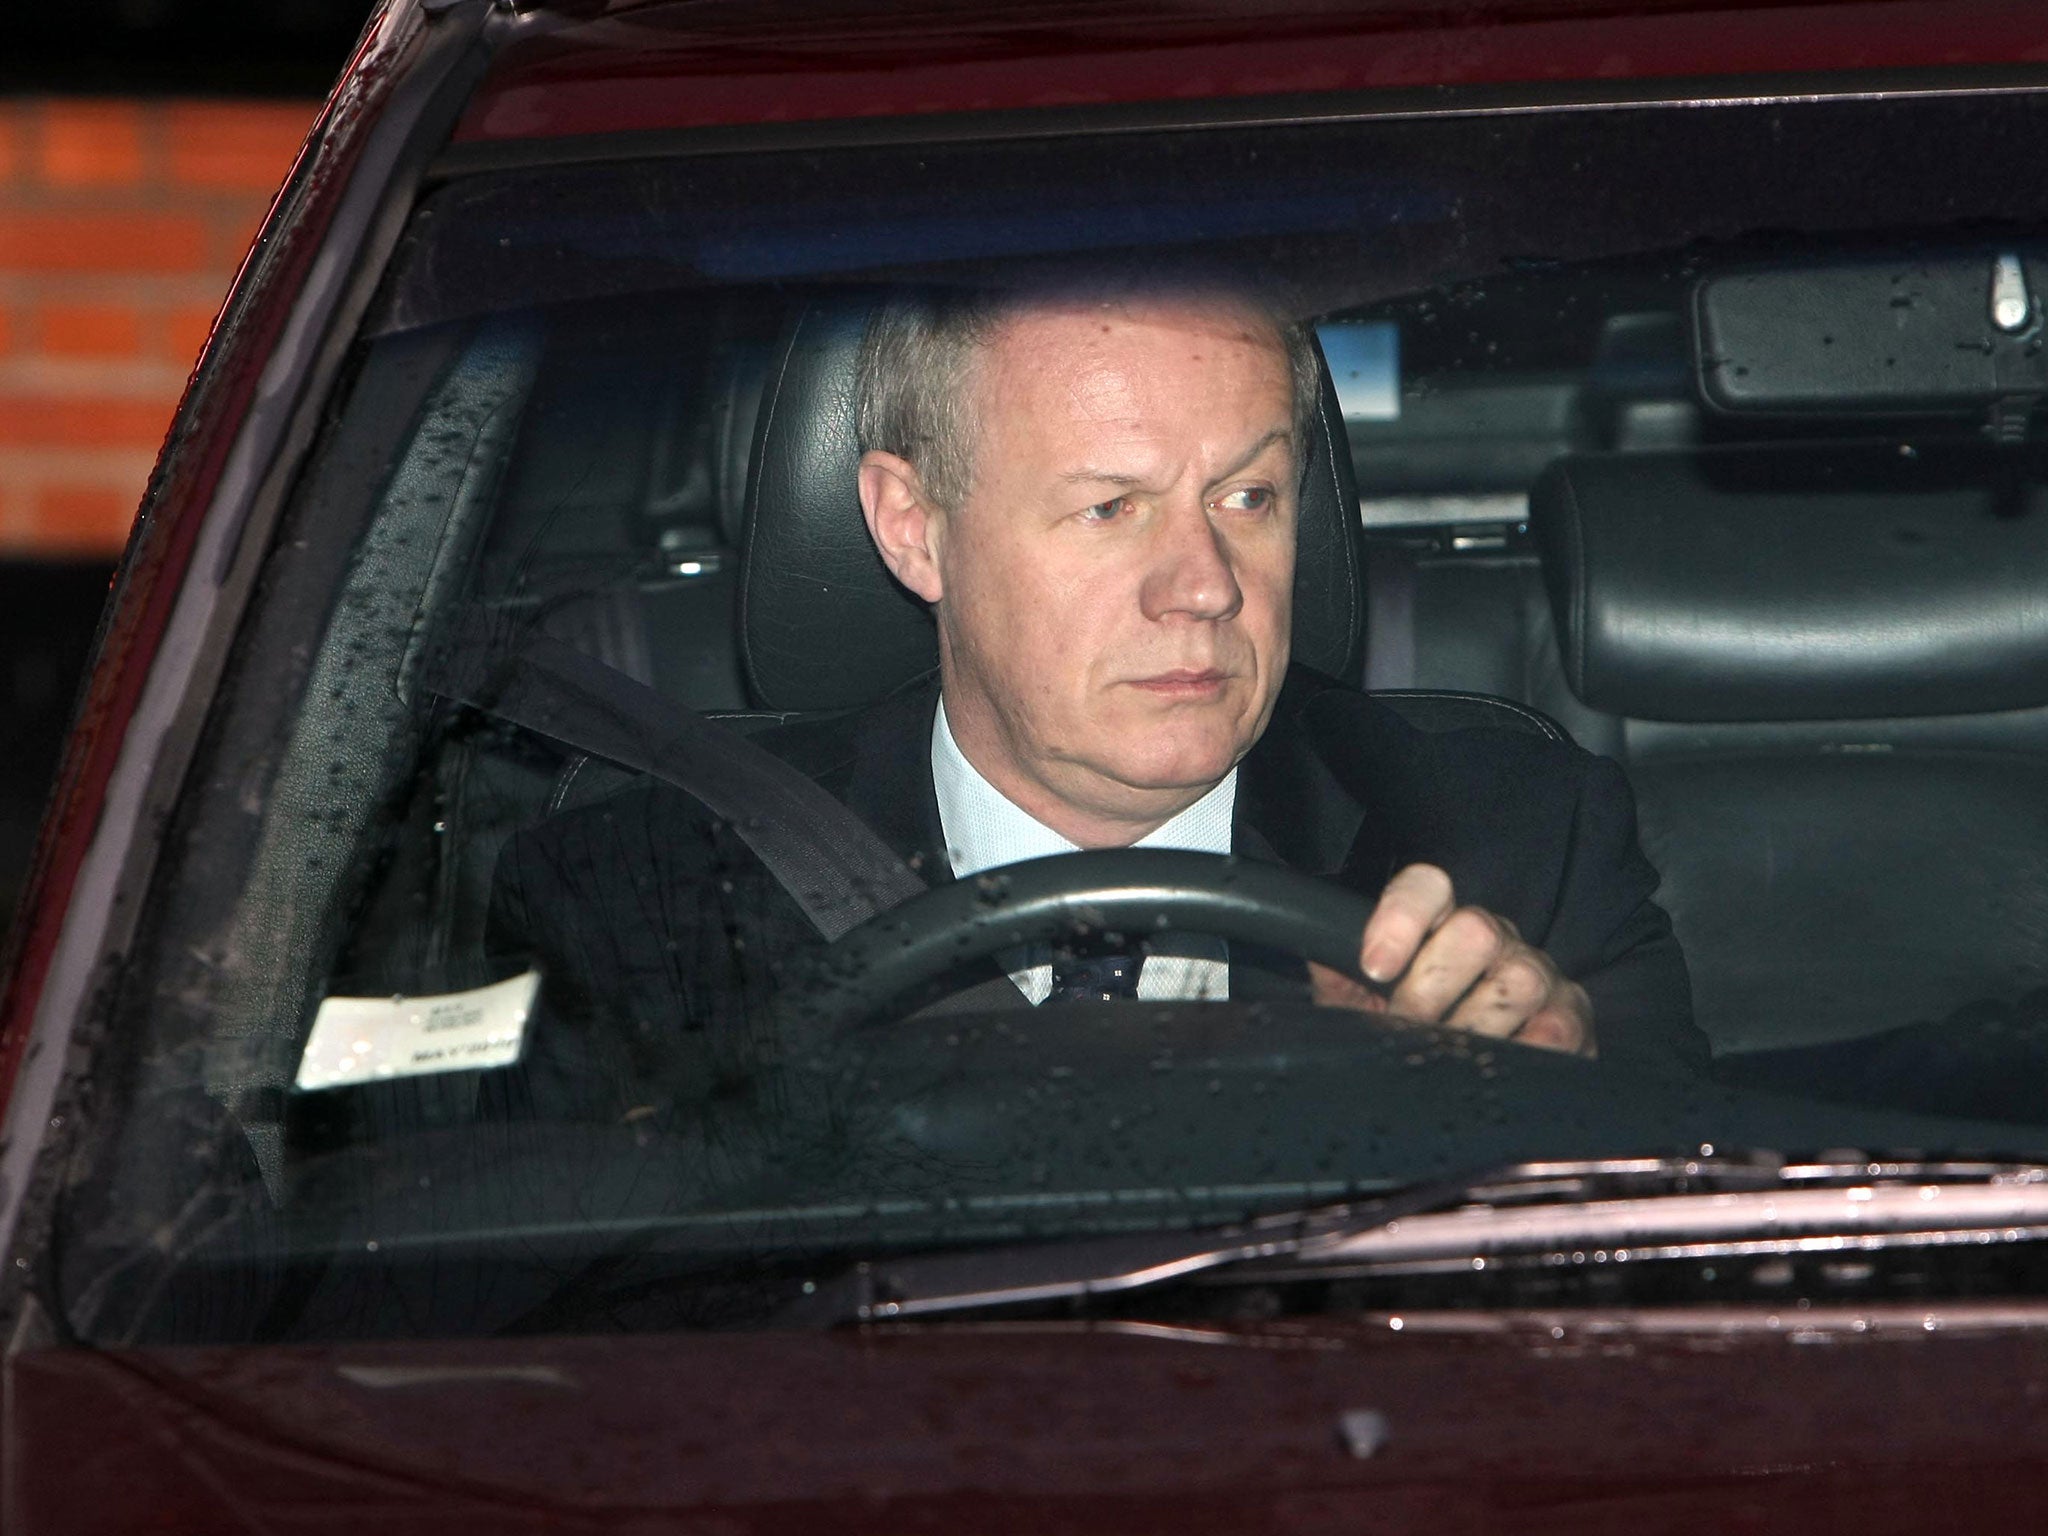 The Tory MP Damian Green was arrested in 2008 over claims that he had leaked confidential government documents